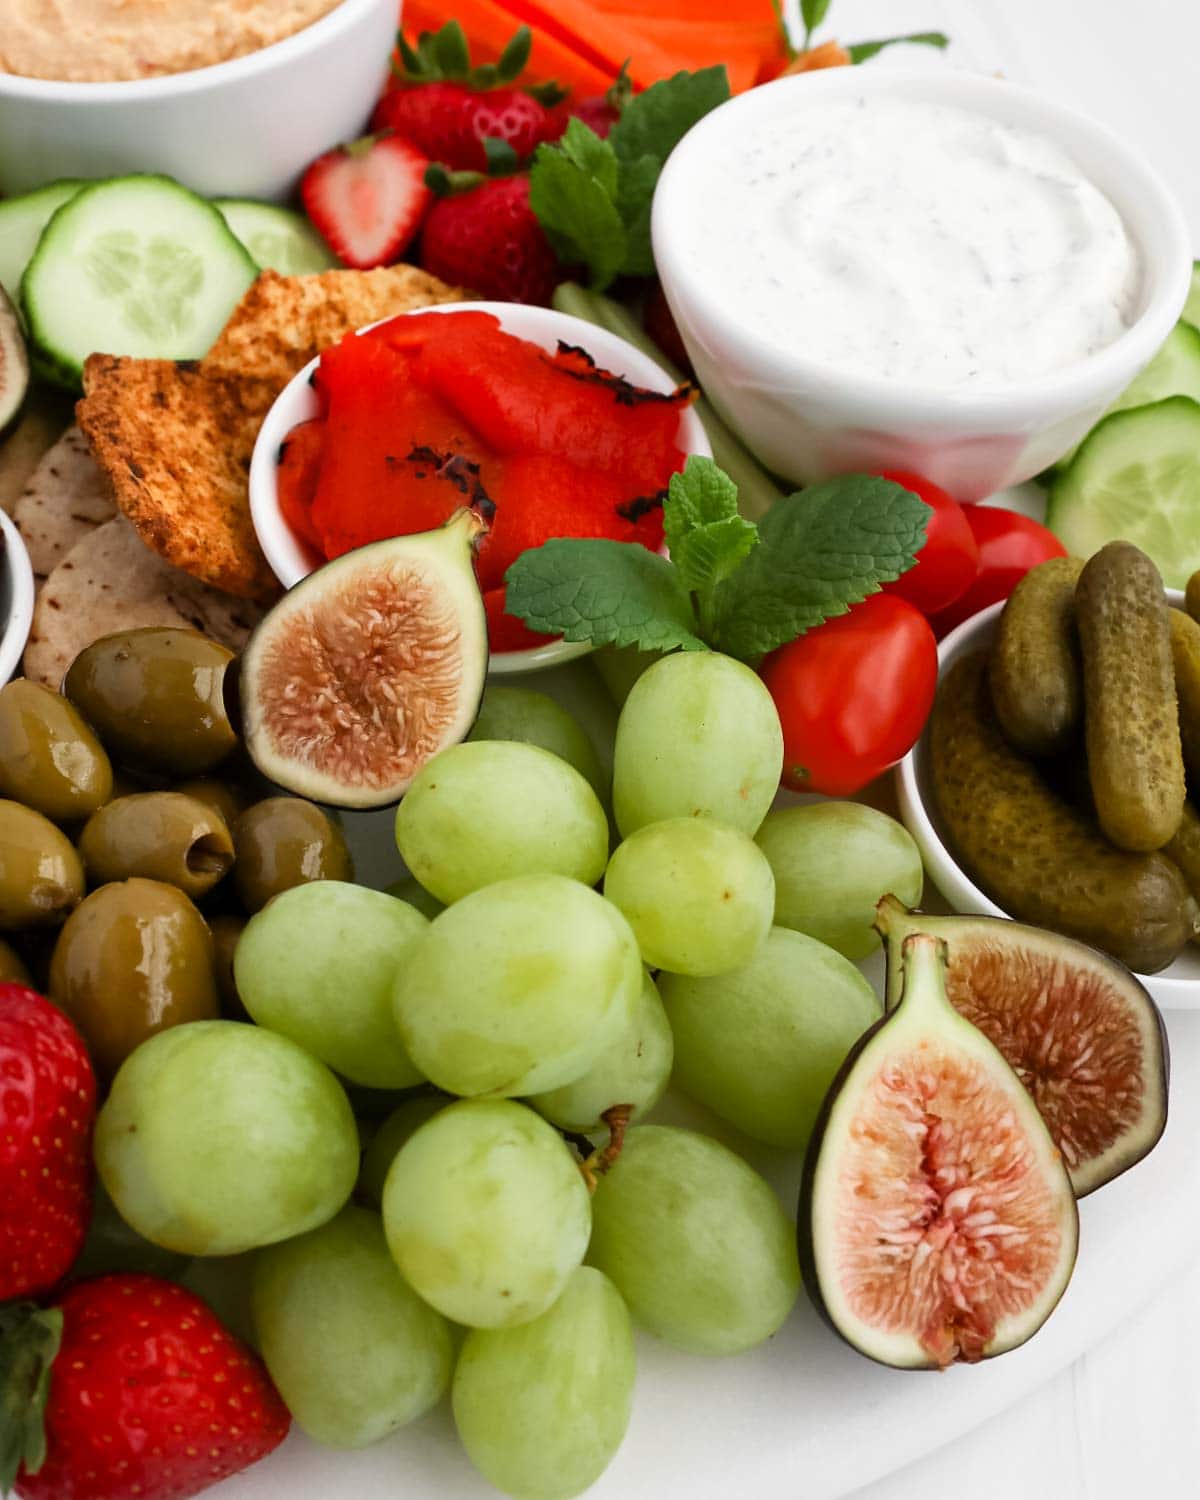 A close up image of a charcuterie board with grapes, figs, olives, pickles, tomatoes, strawberries, tzatziki, crackers, and cucumbers.